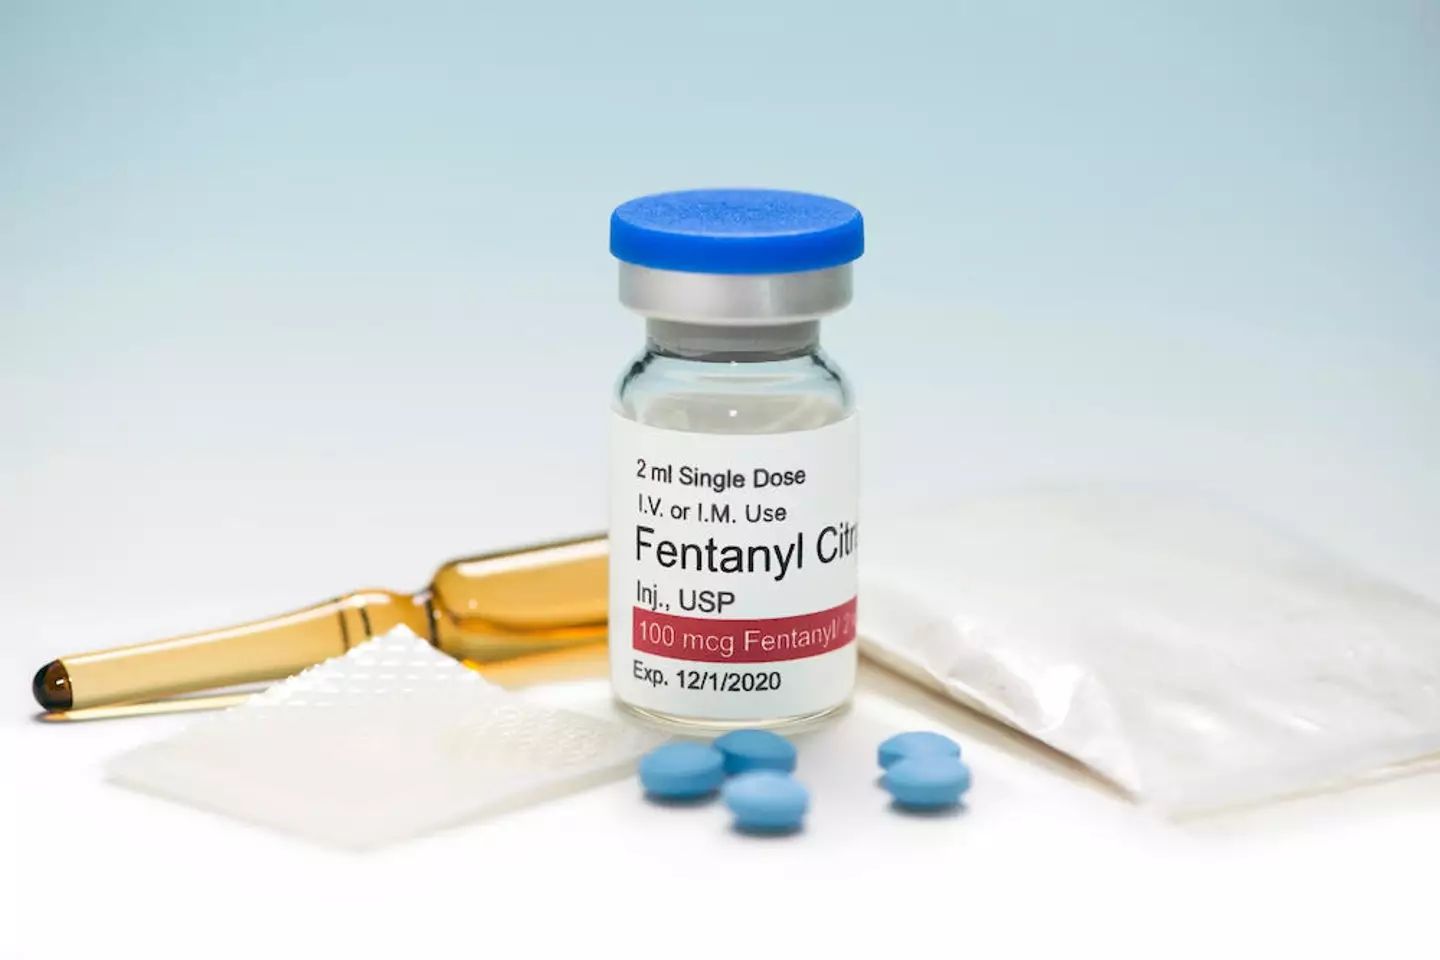 Fentanyl is a very potent opioid.